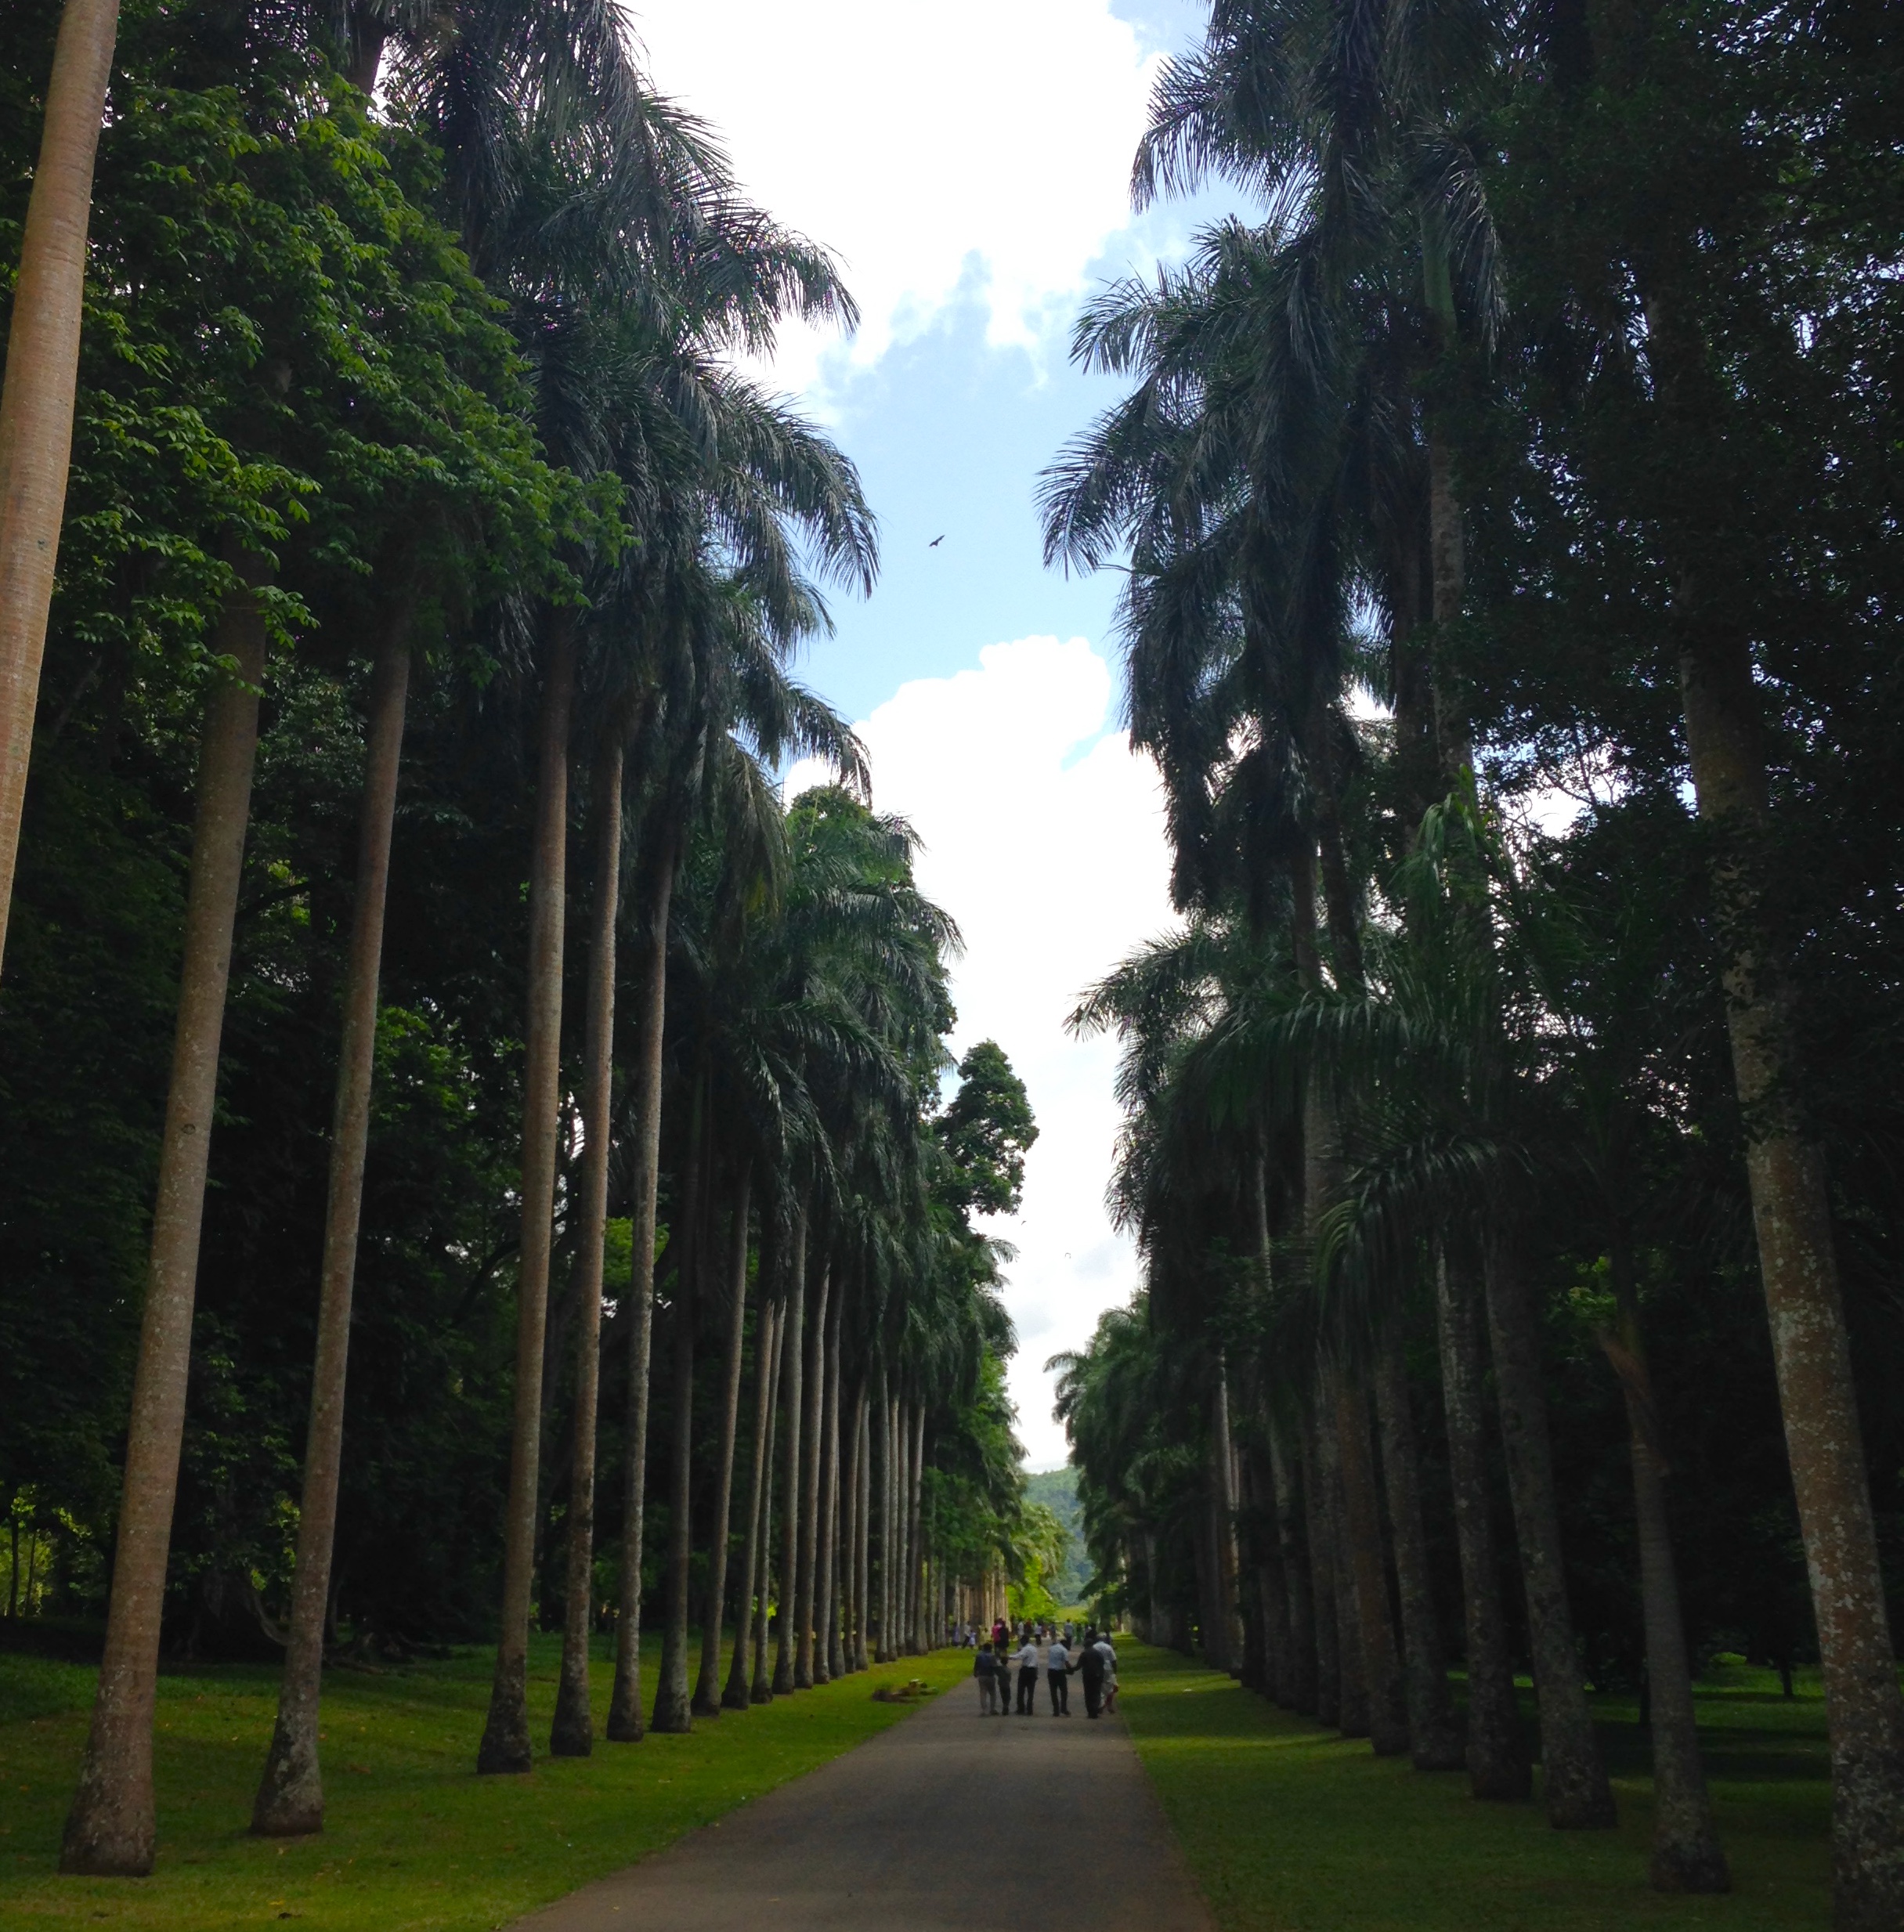 a photo from the Royal Botanic Gardens in Kandy, Sri Lanka. a grove of palm trees line a brown gravel path in two neat, orderly rows. green grass covers the ground wherever there isn't gravel. the sky above is cloudy, with blue skies tinged with yellow from the heat and humidity. a group of five or six people are walking away from the camera, on the path, towards the distance.